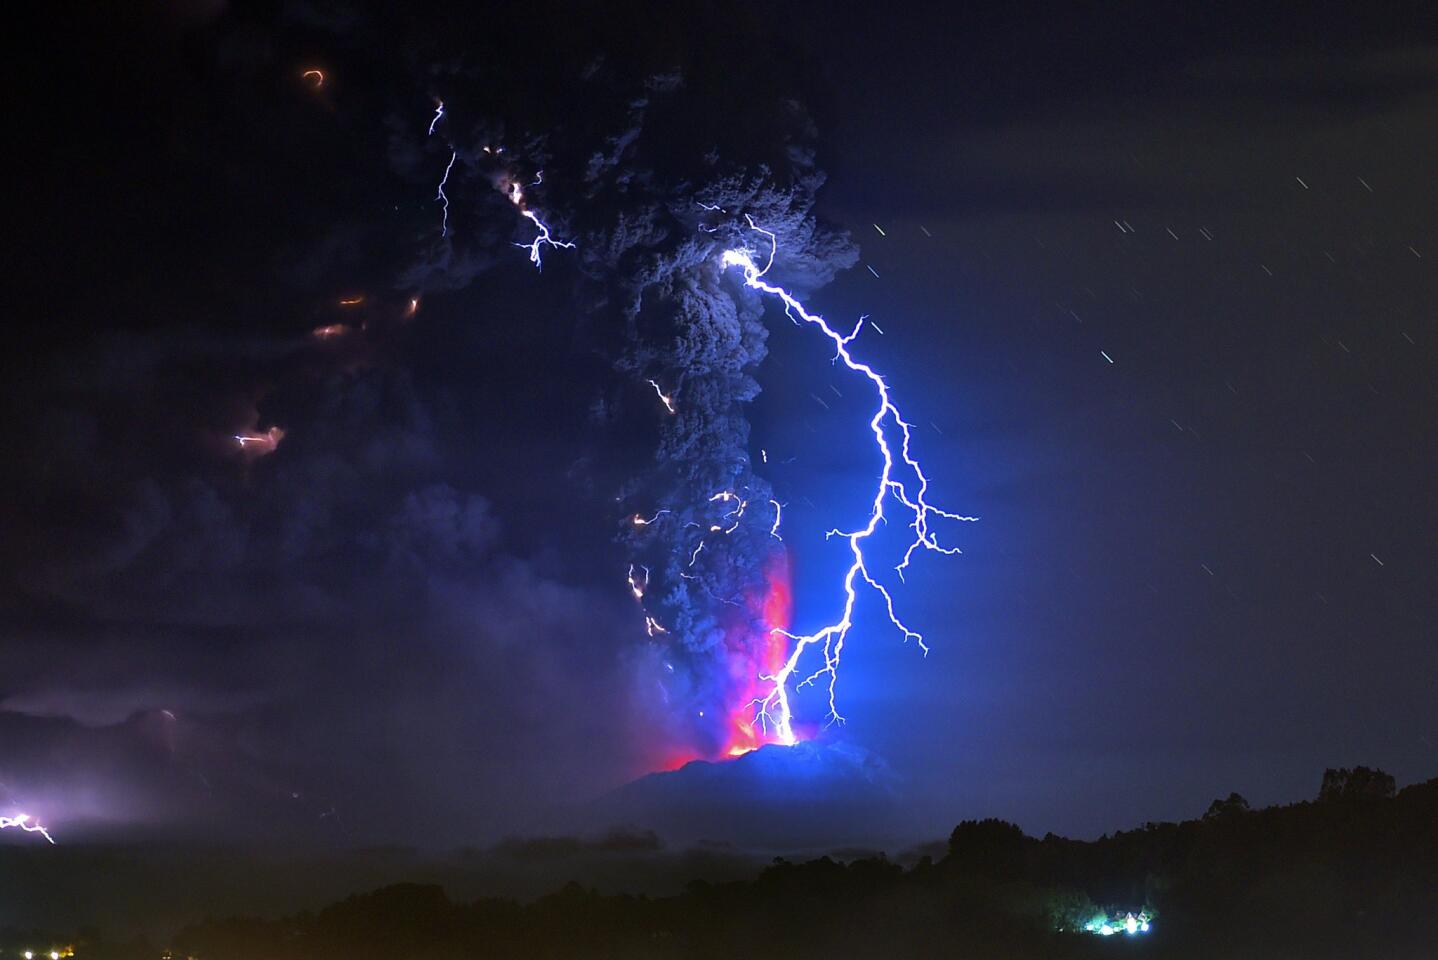 Lava spews from the Calbuco volcano in southern Chile on April 23, 2015.